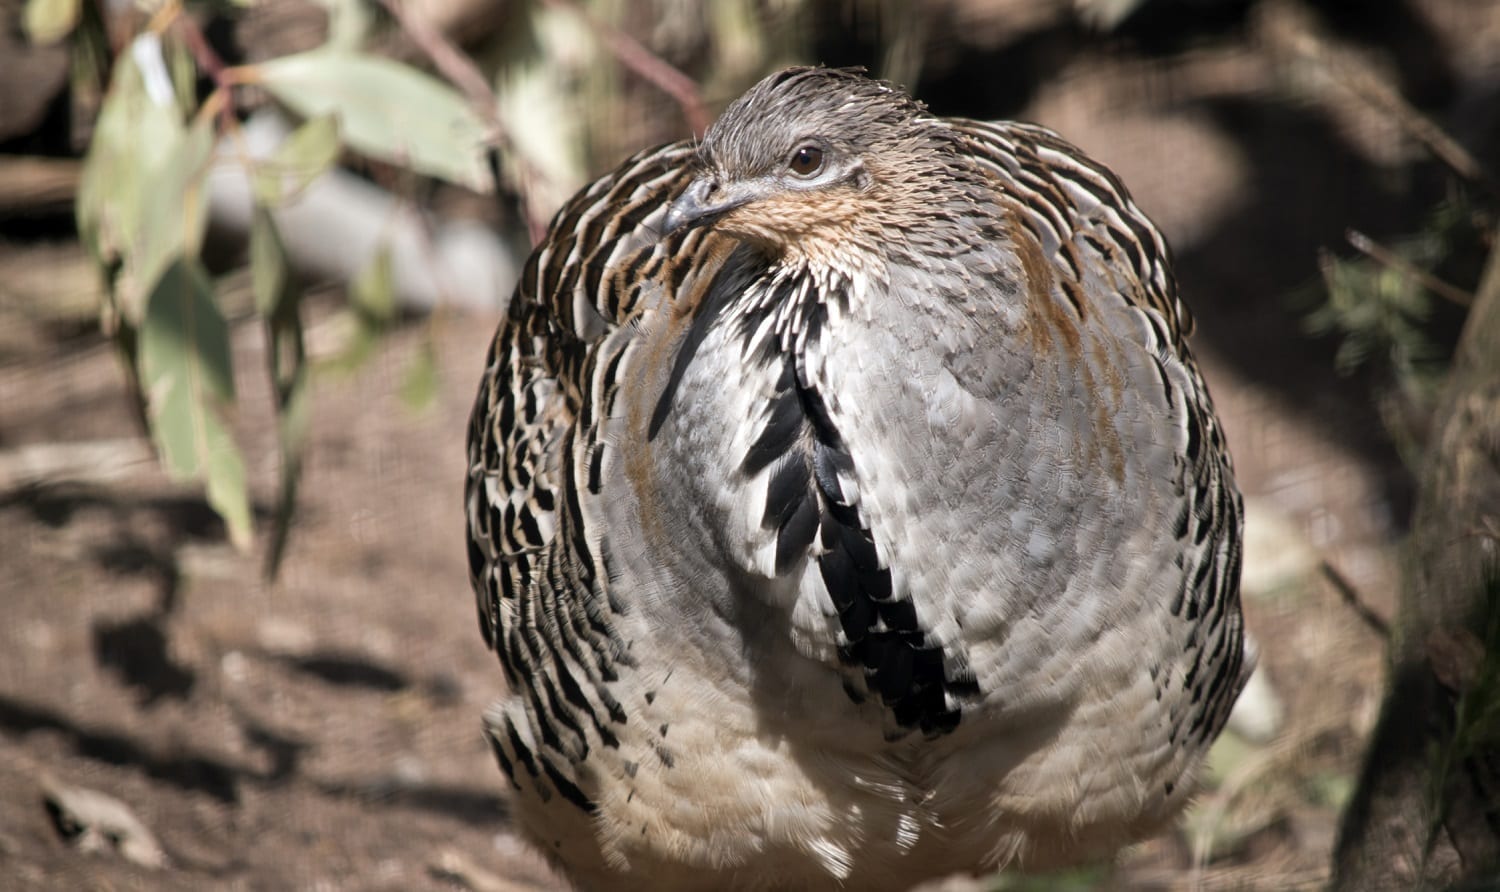 Malleefowl closeup showing its brown mottles plumage: ID 134428149 © Ozflash | Dreamstime.com